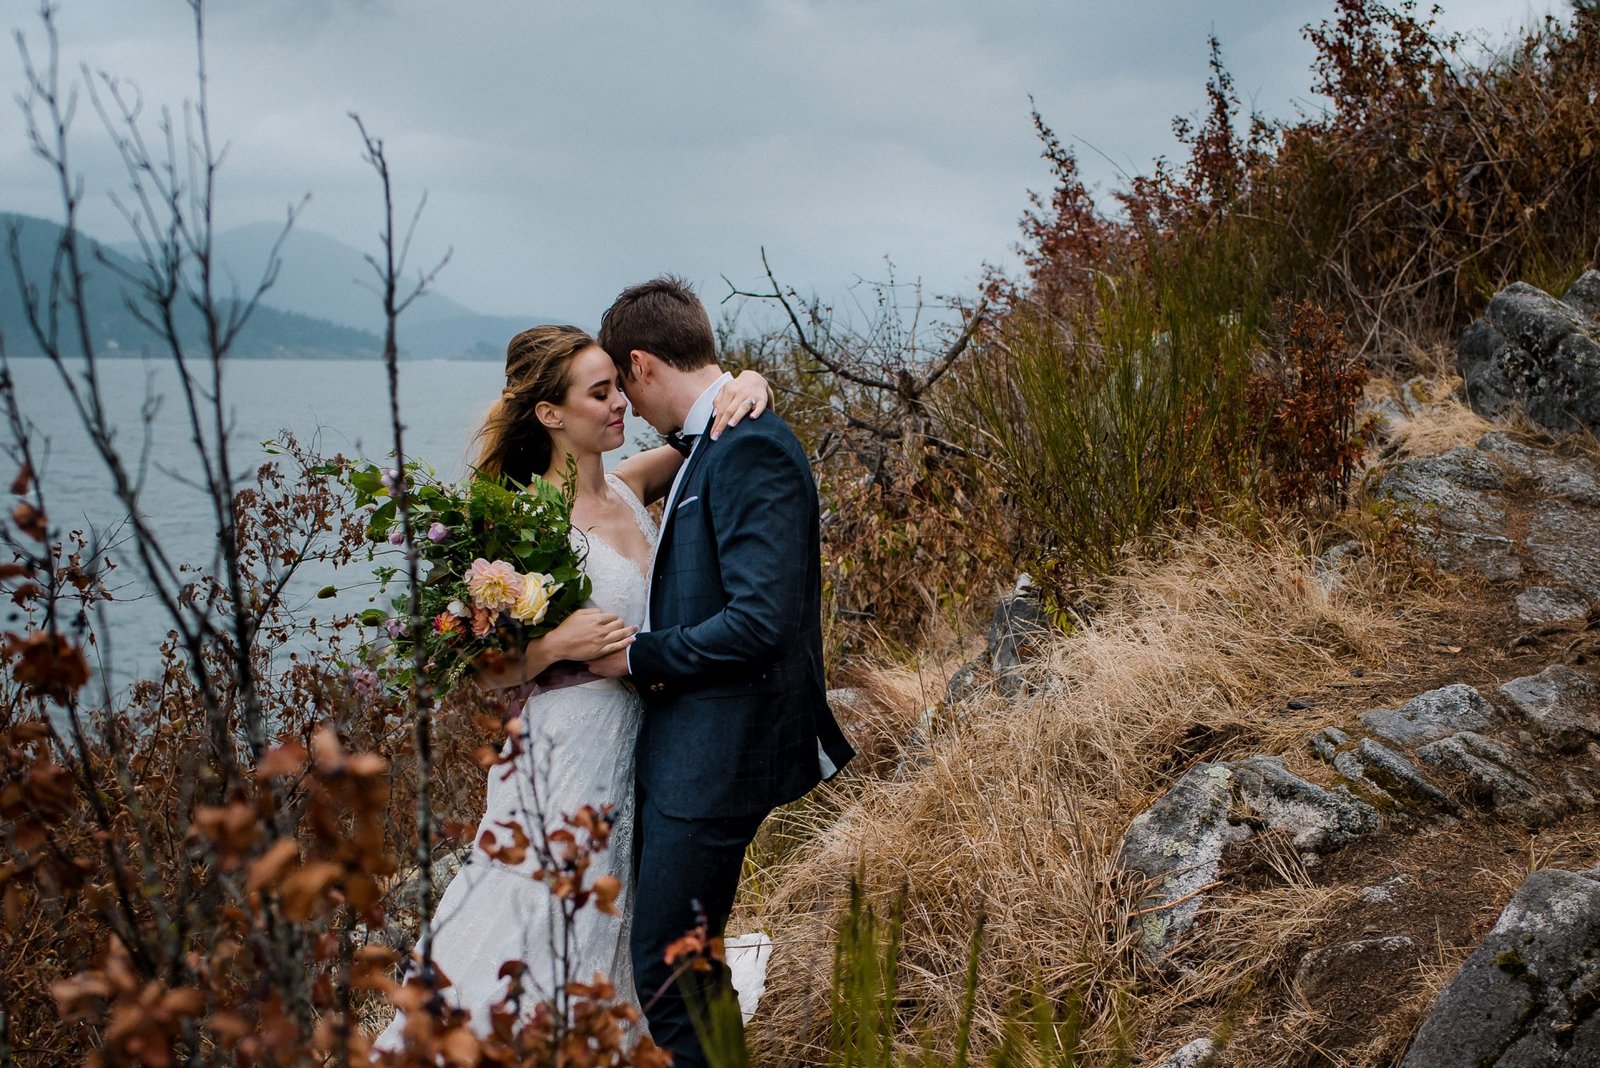 Wedding Portraits at Whytecliff Park, Vancouver, BC